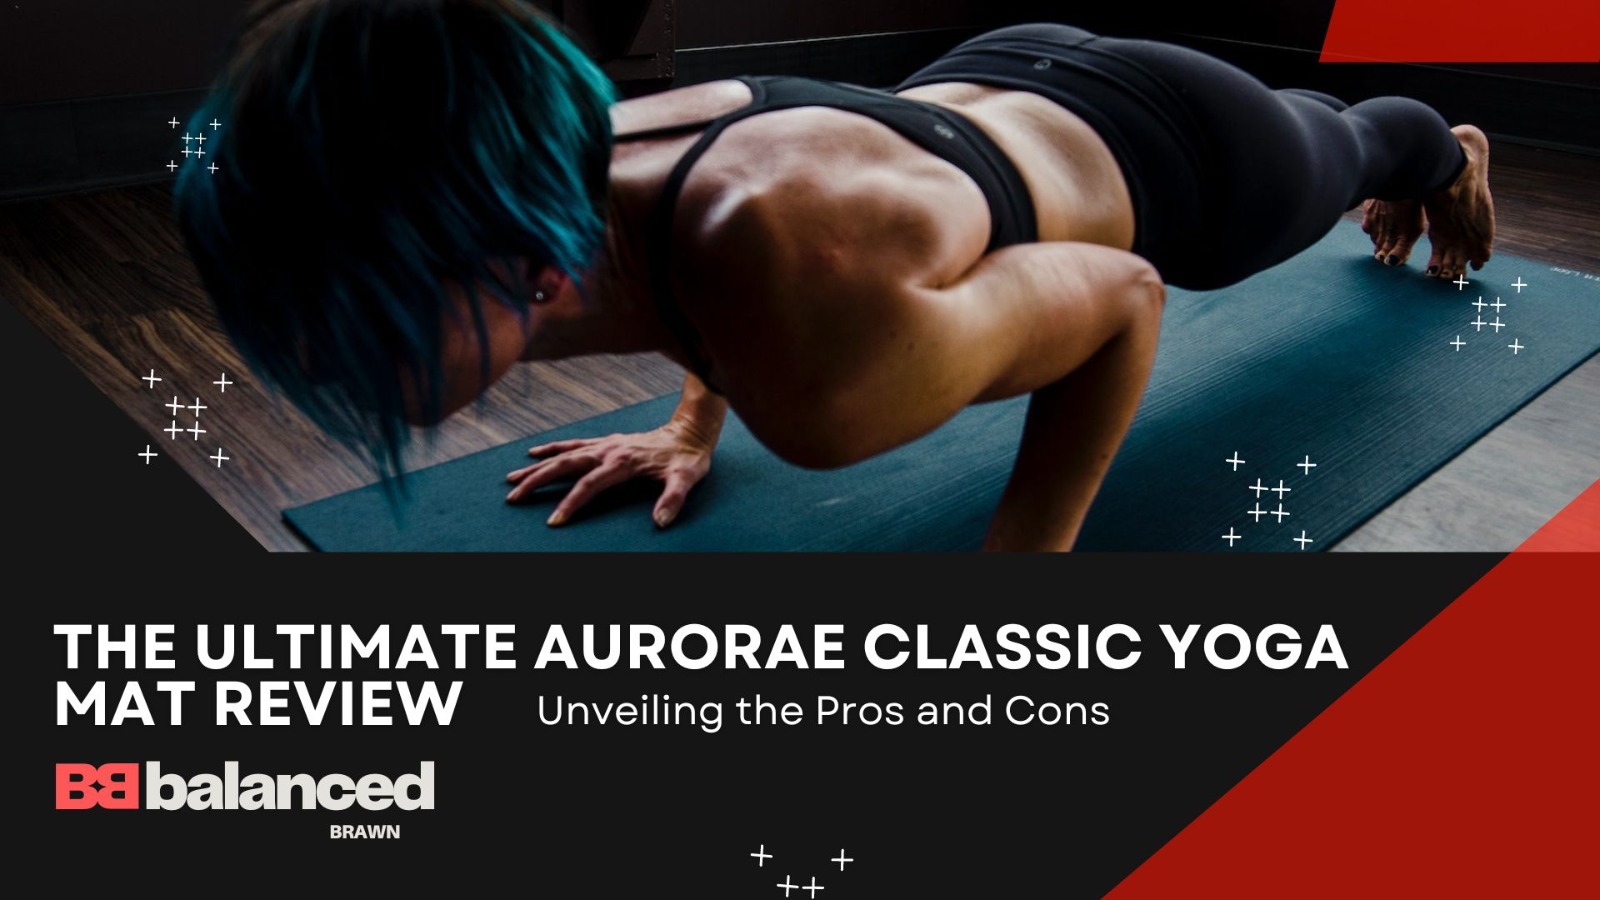 Aurorae Yoga Products Perfect for At-Home Workout #MegaChristmas20